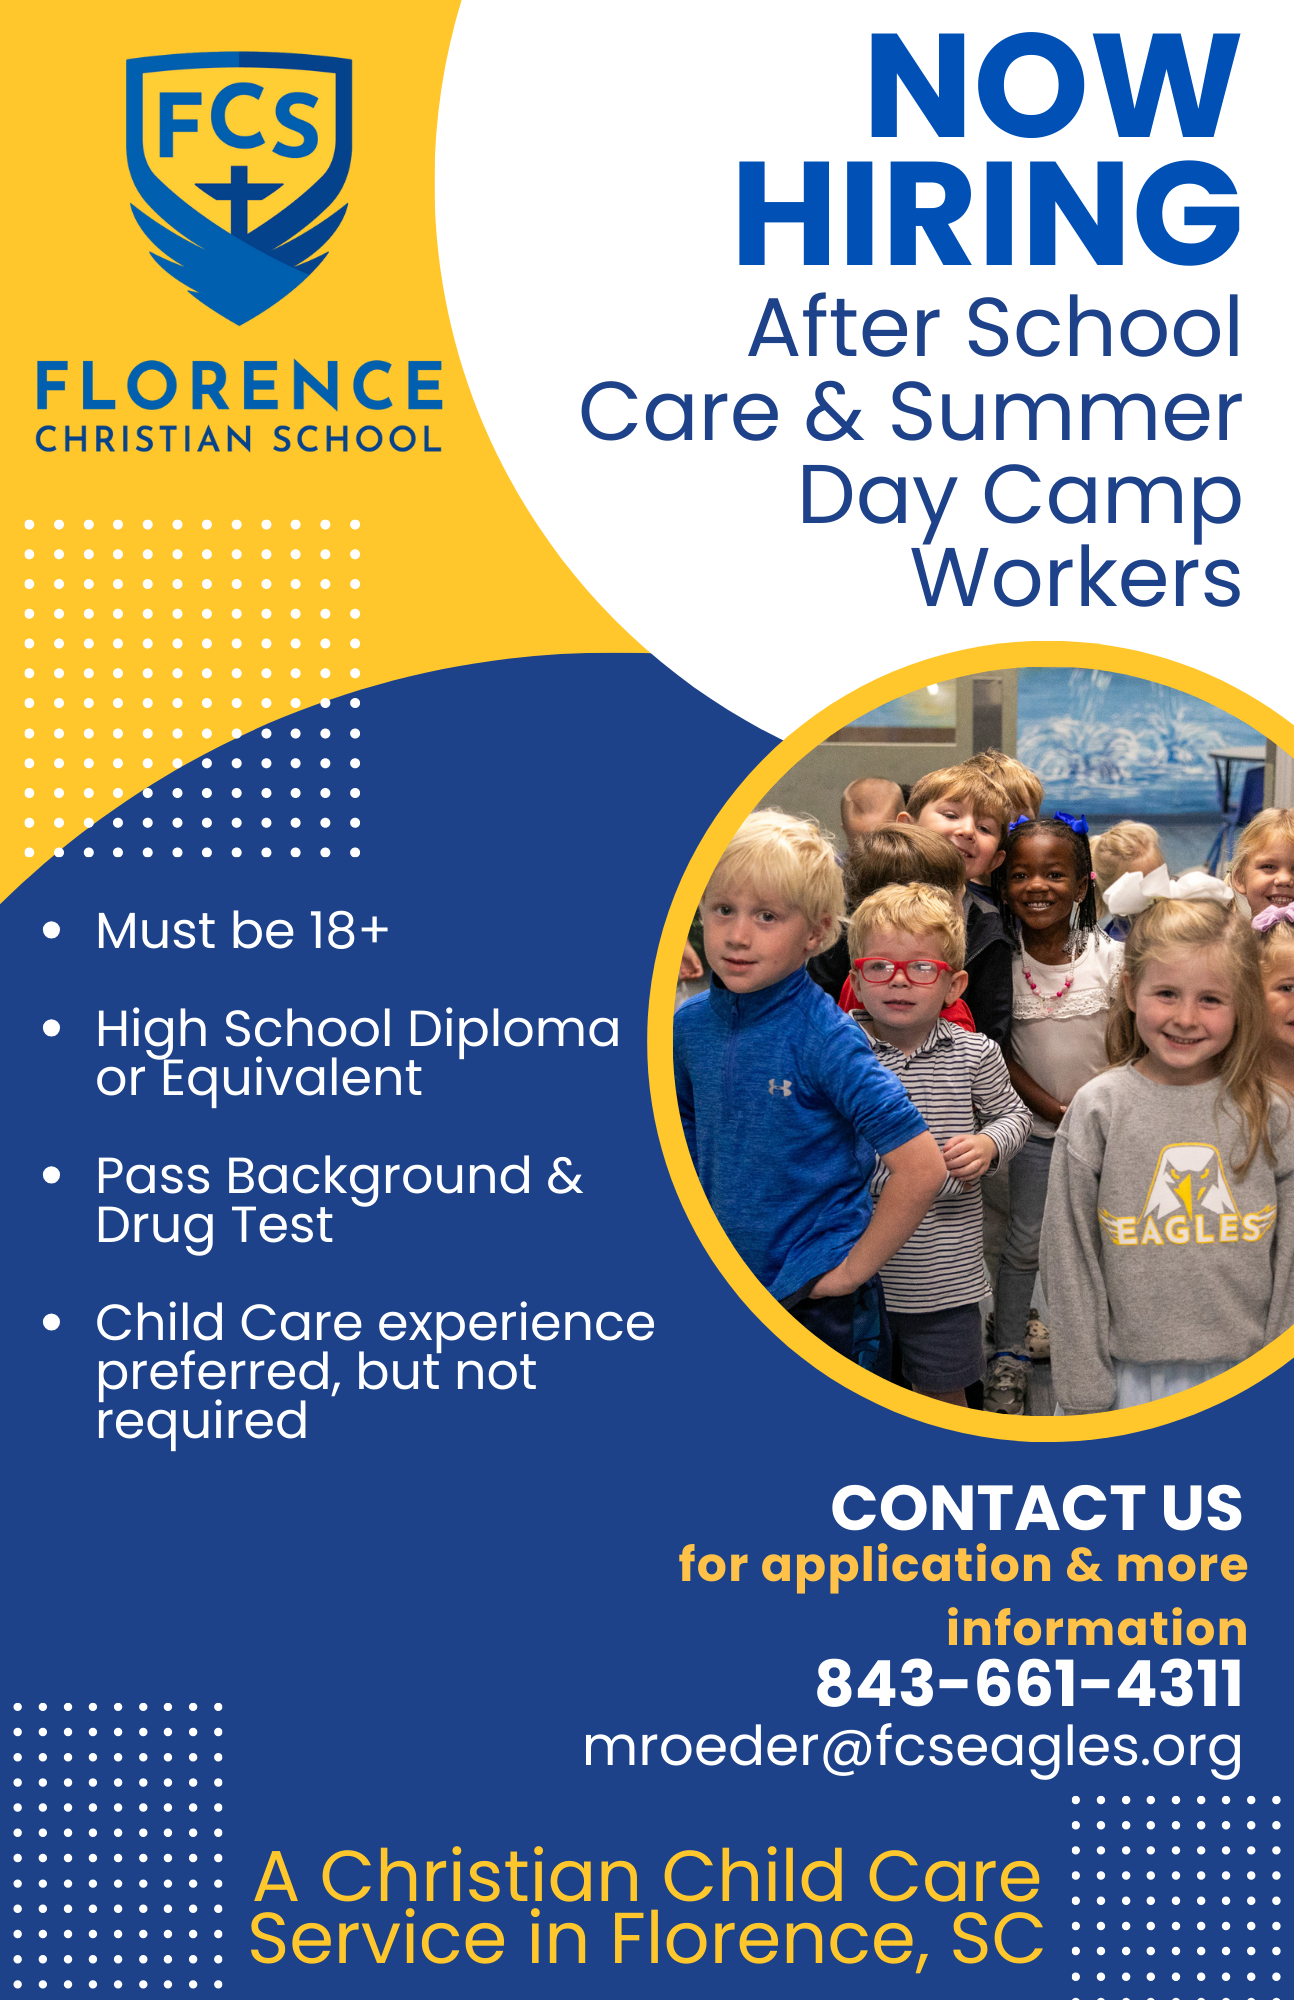 Job opportunity at Florence Christian School, hiring after-school care and summer day camp workers